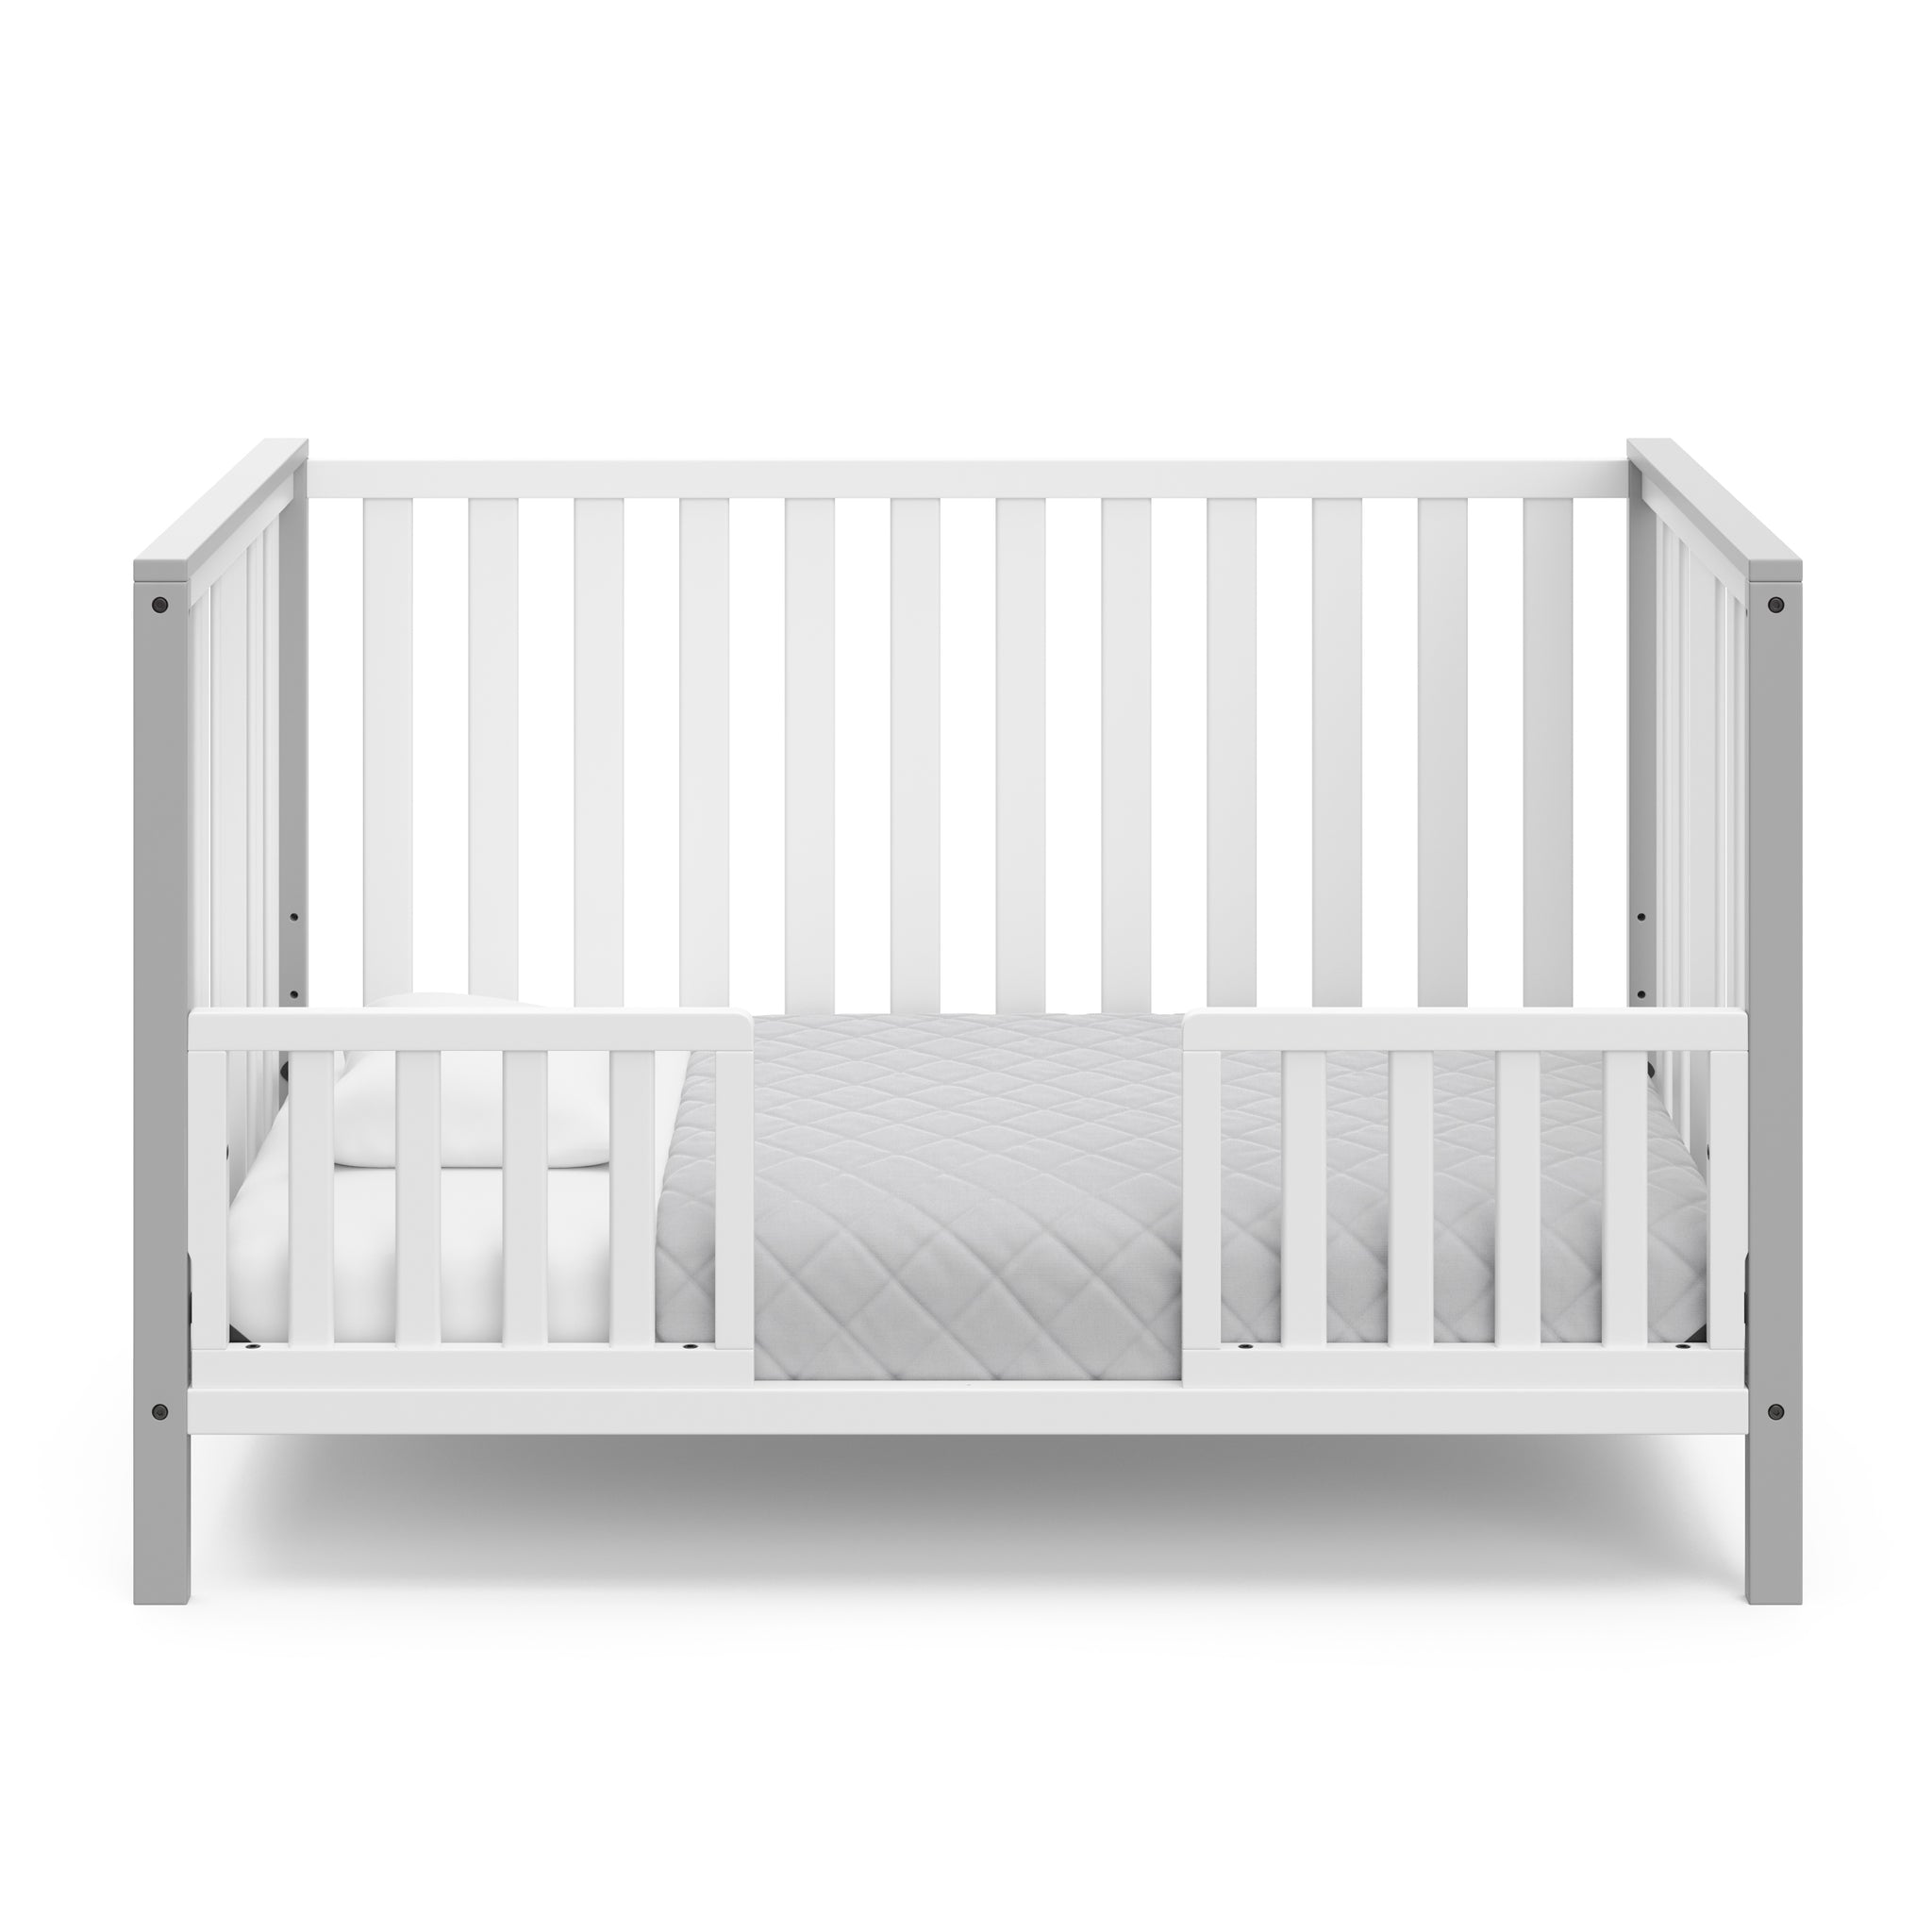 White crib with pebble gray in toddler bed conversion with two safety guardrails